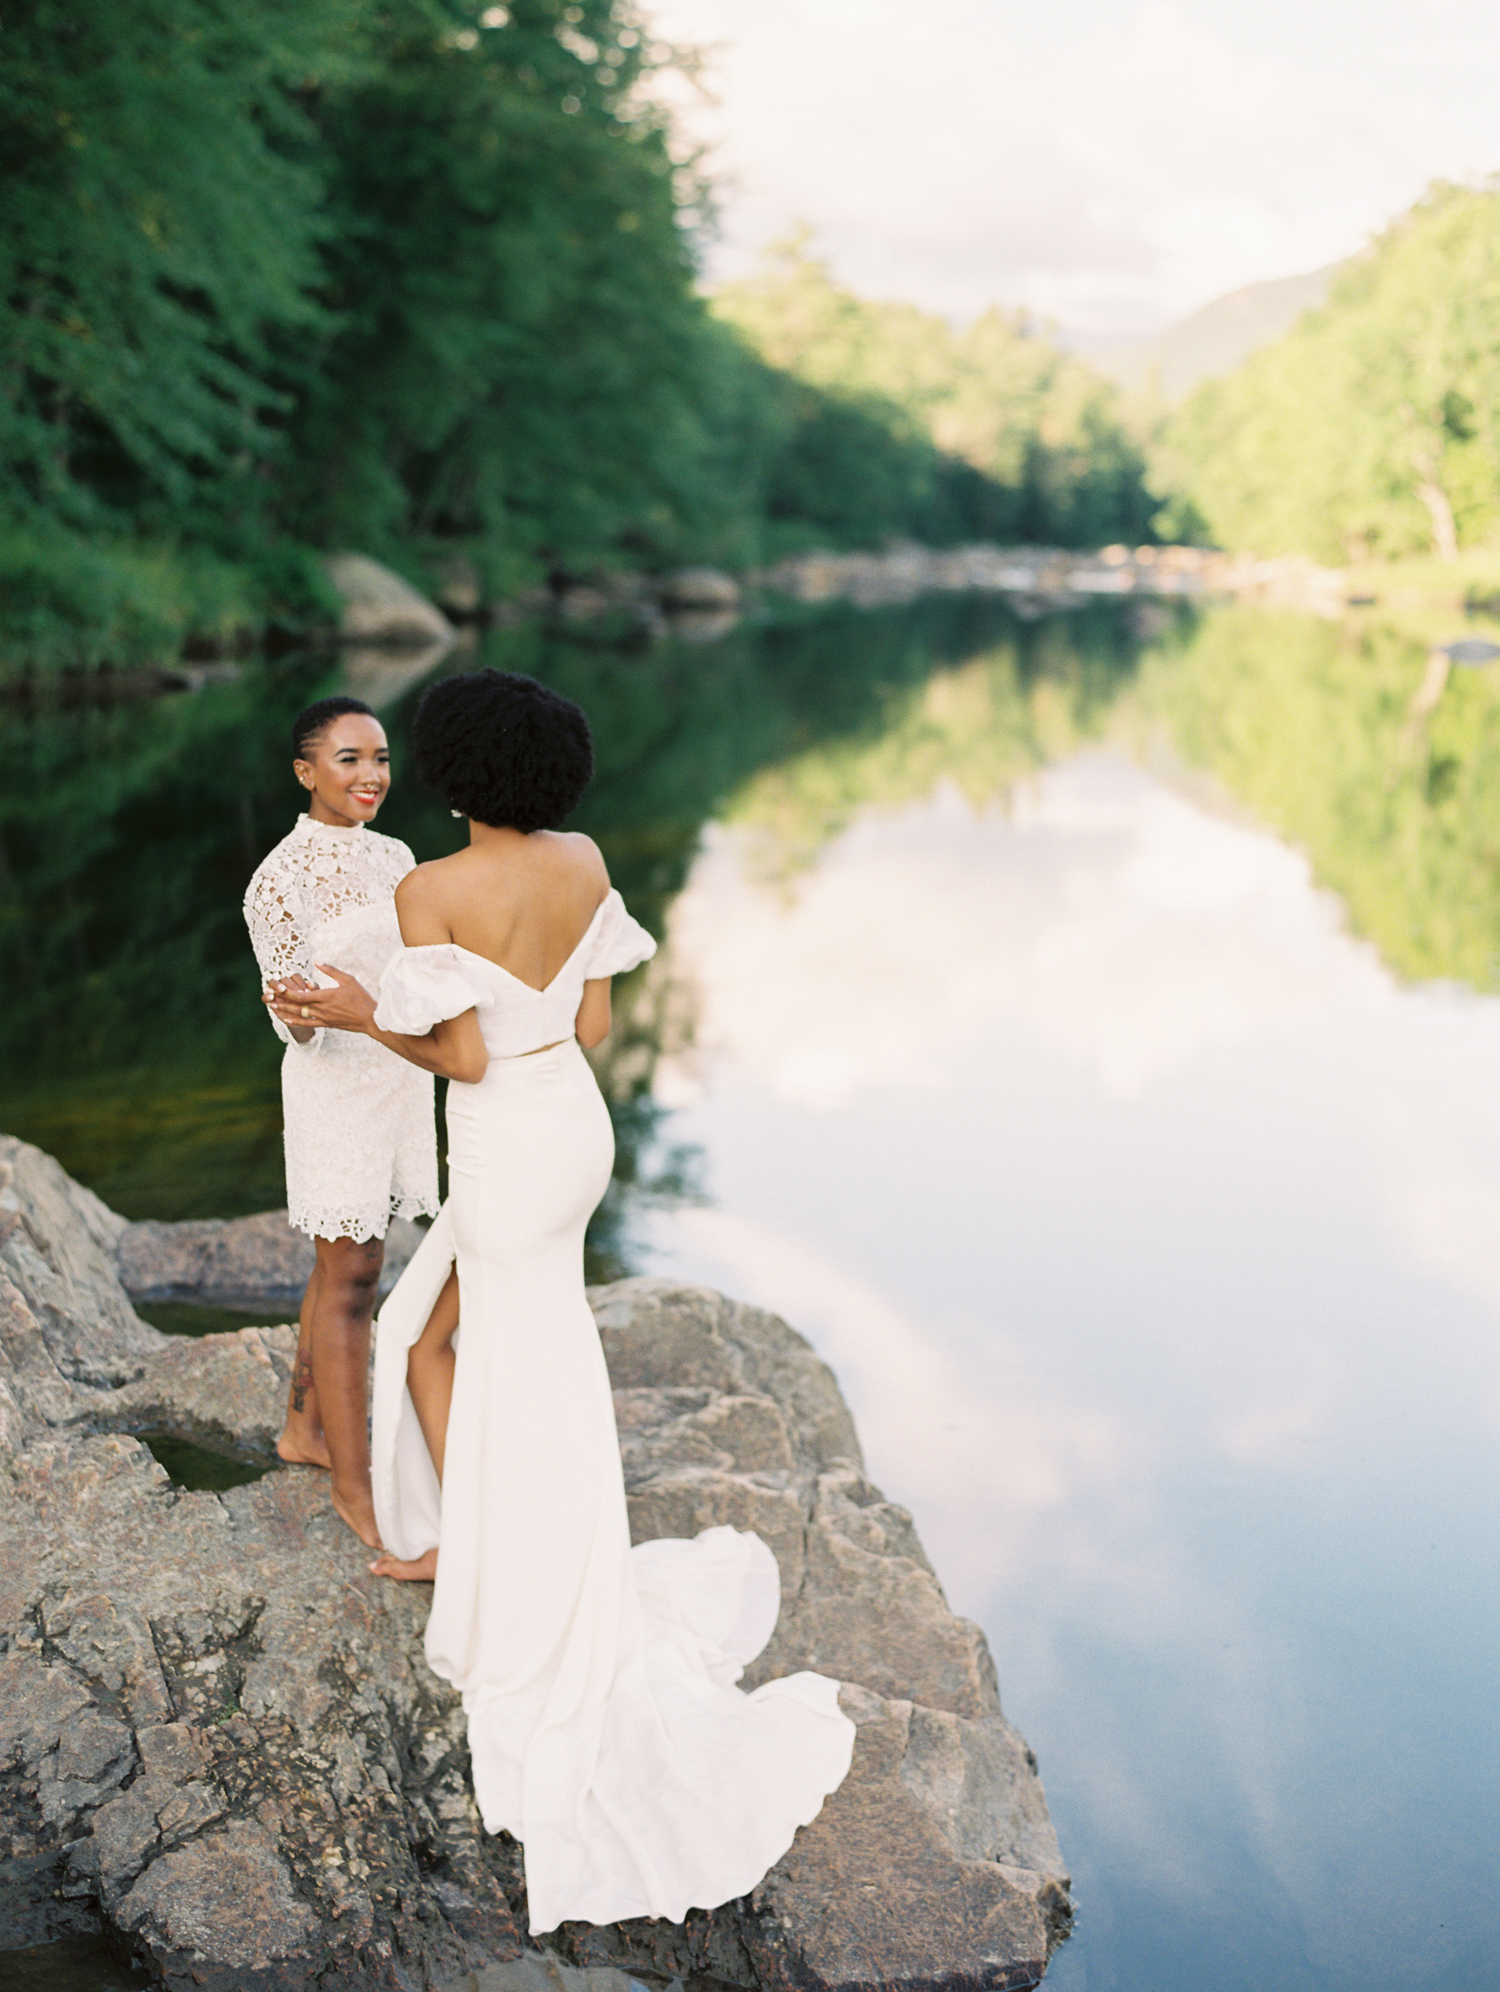 Elopement in the river | 2020  Adirondack Wedding Workshop hosted by Mary Dougherty